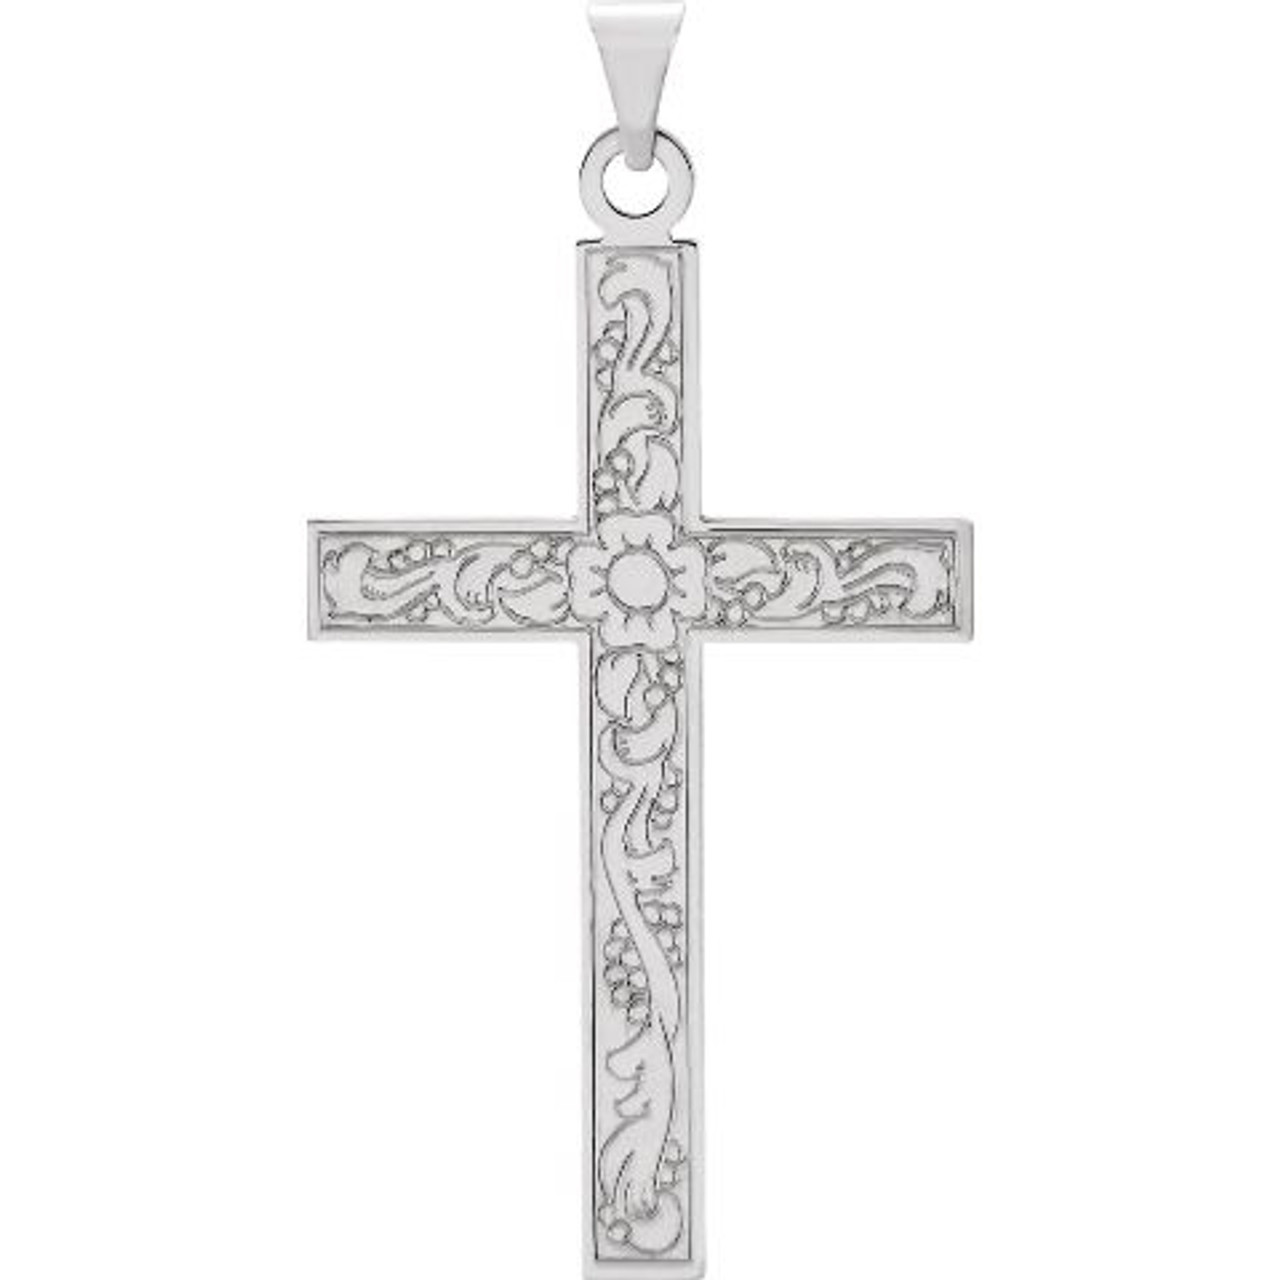 Small Cross 14mm Toddler/Kids/Girls Necklace Religious - Sterling Silv